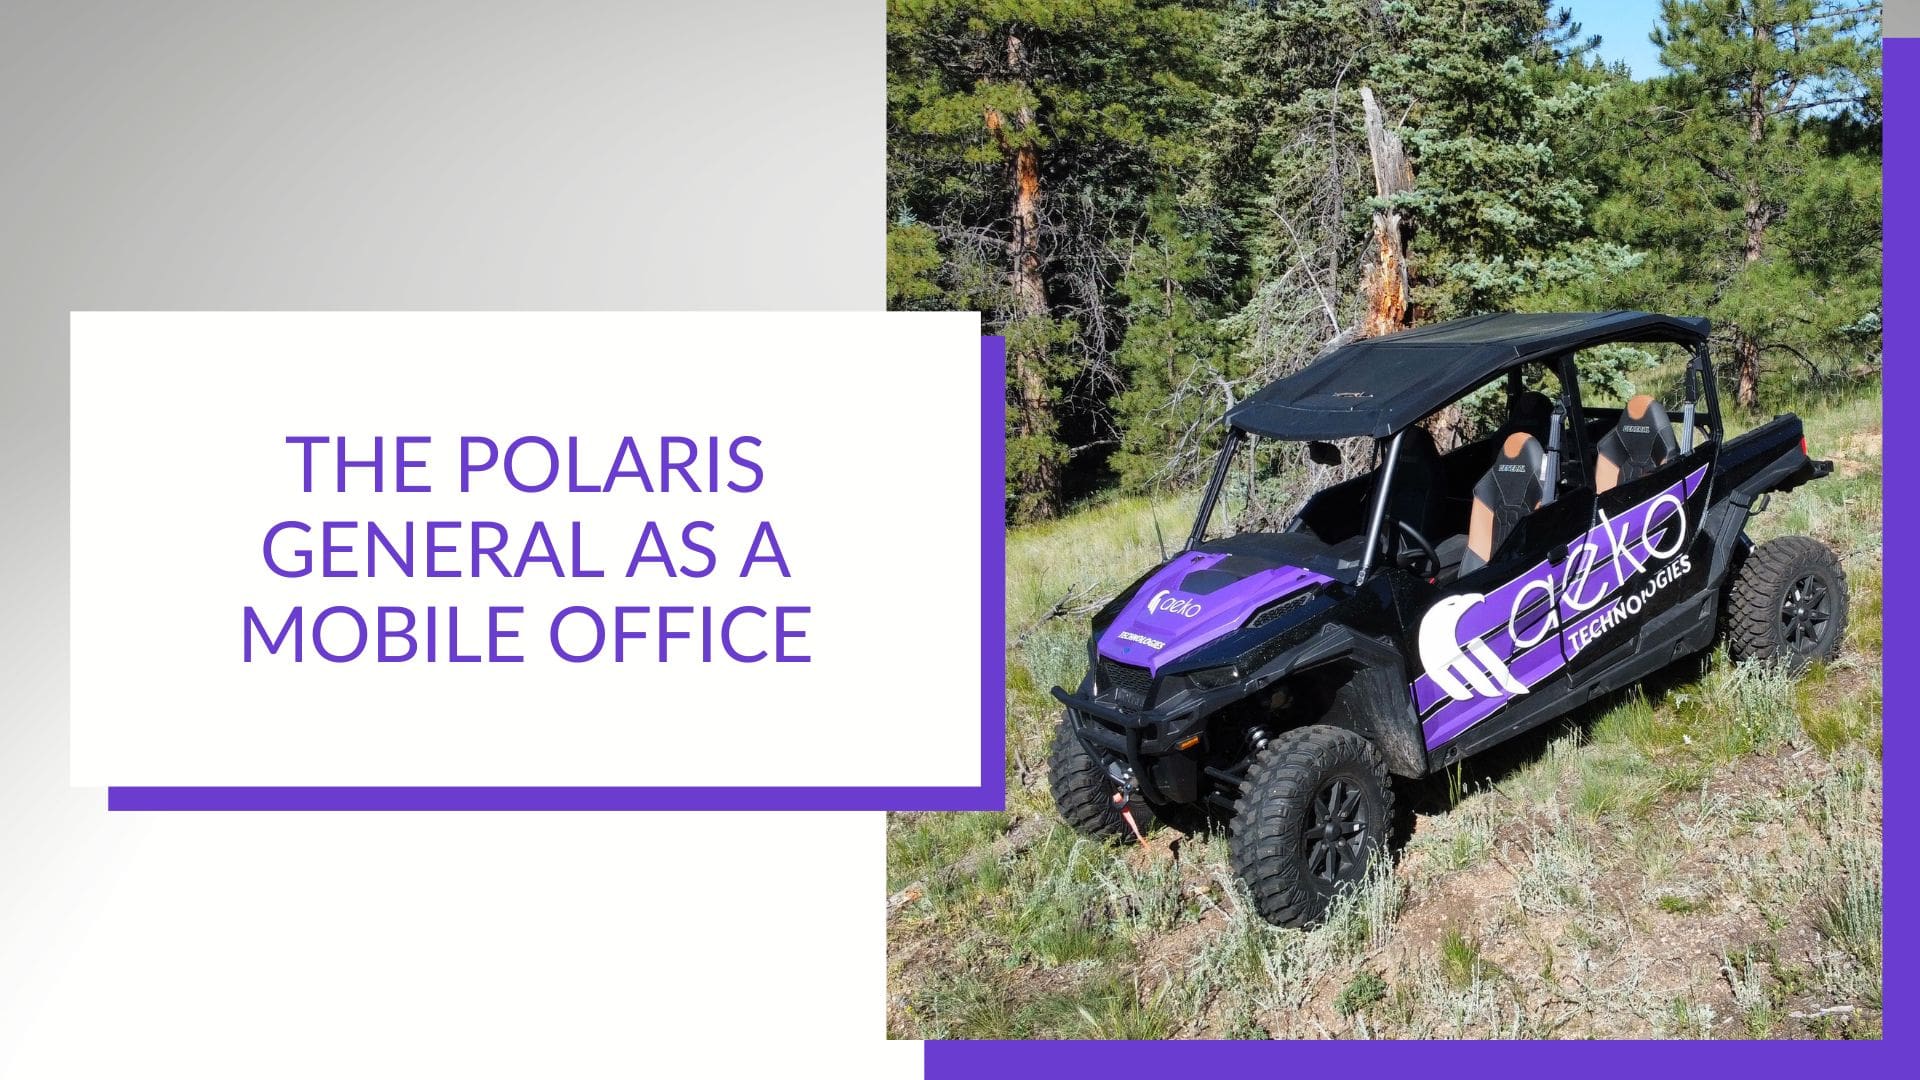 Why I Chose a Polaris General as a Mobile Office